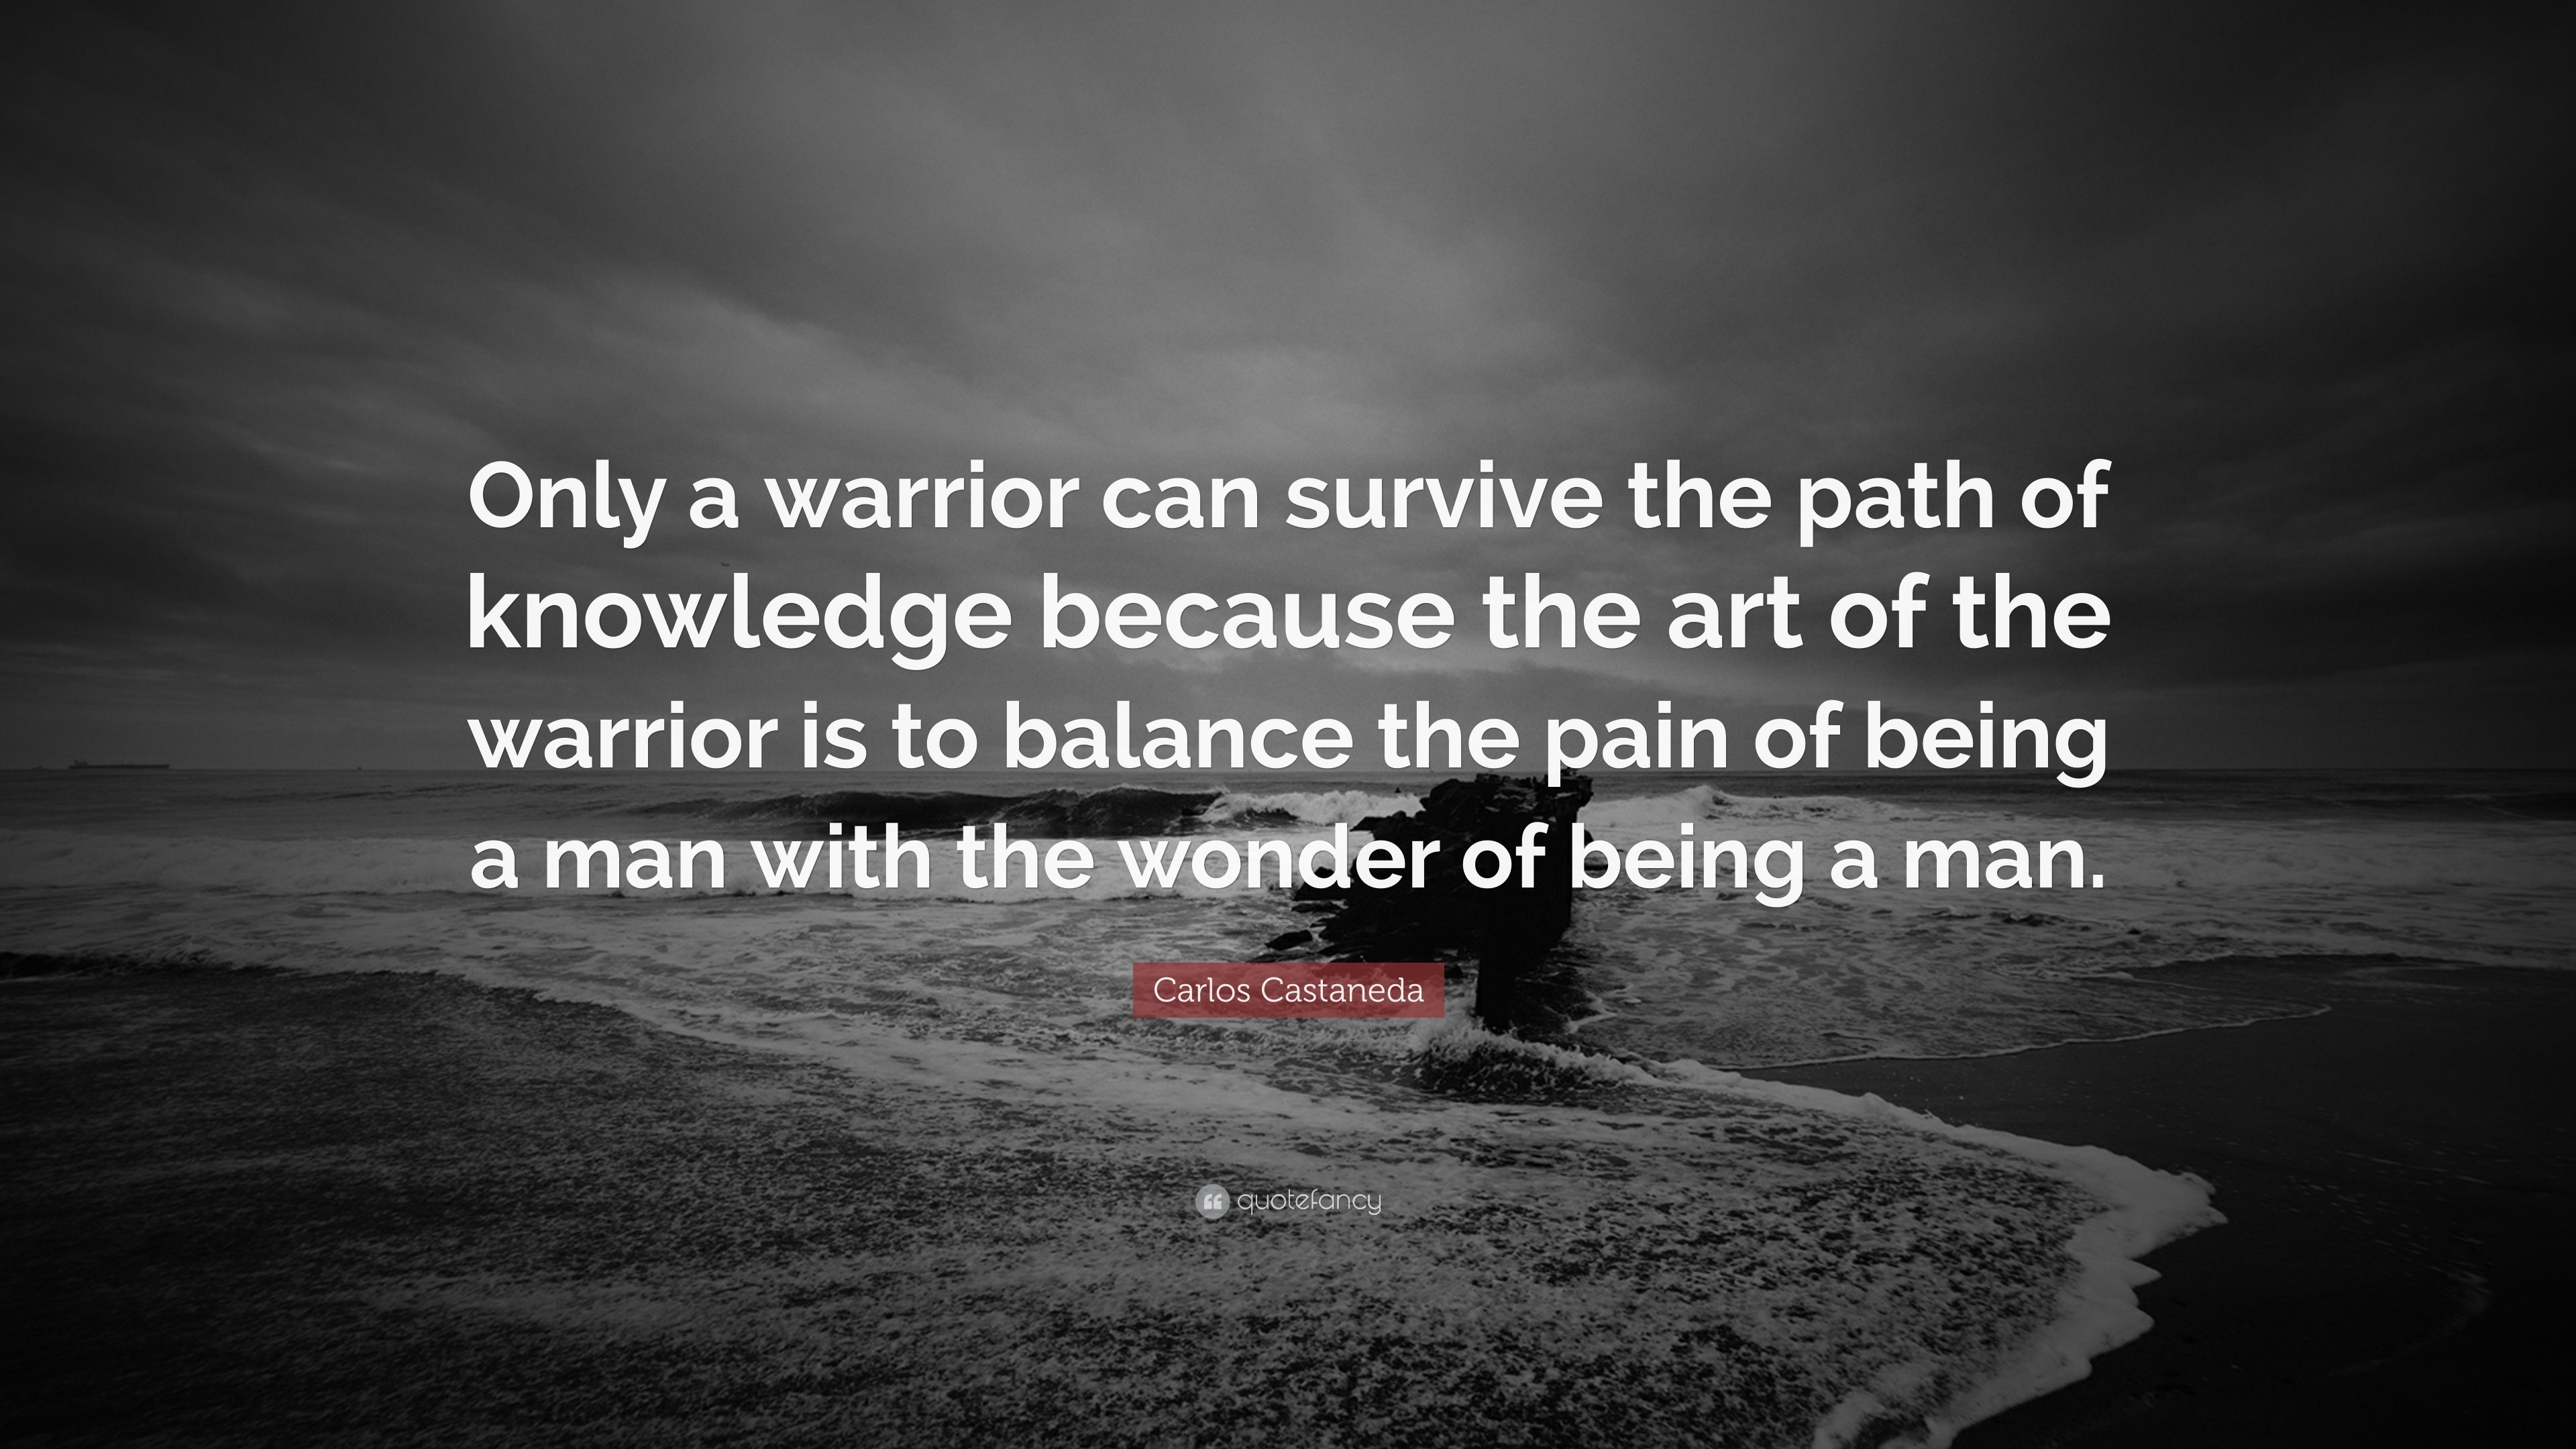 Carlos Castaneda Quote: “Only a warrior can survive the path of knowledge because the art of the warrior is to balance the pain of being a man wi.” (12 wallpaper)